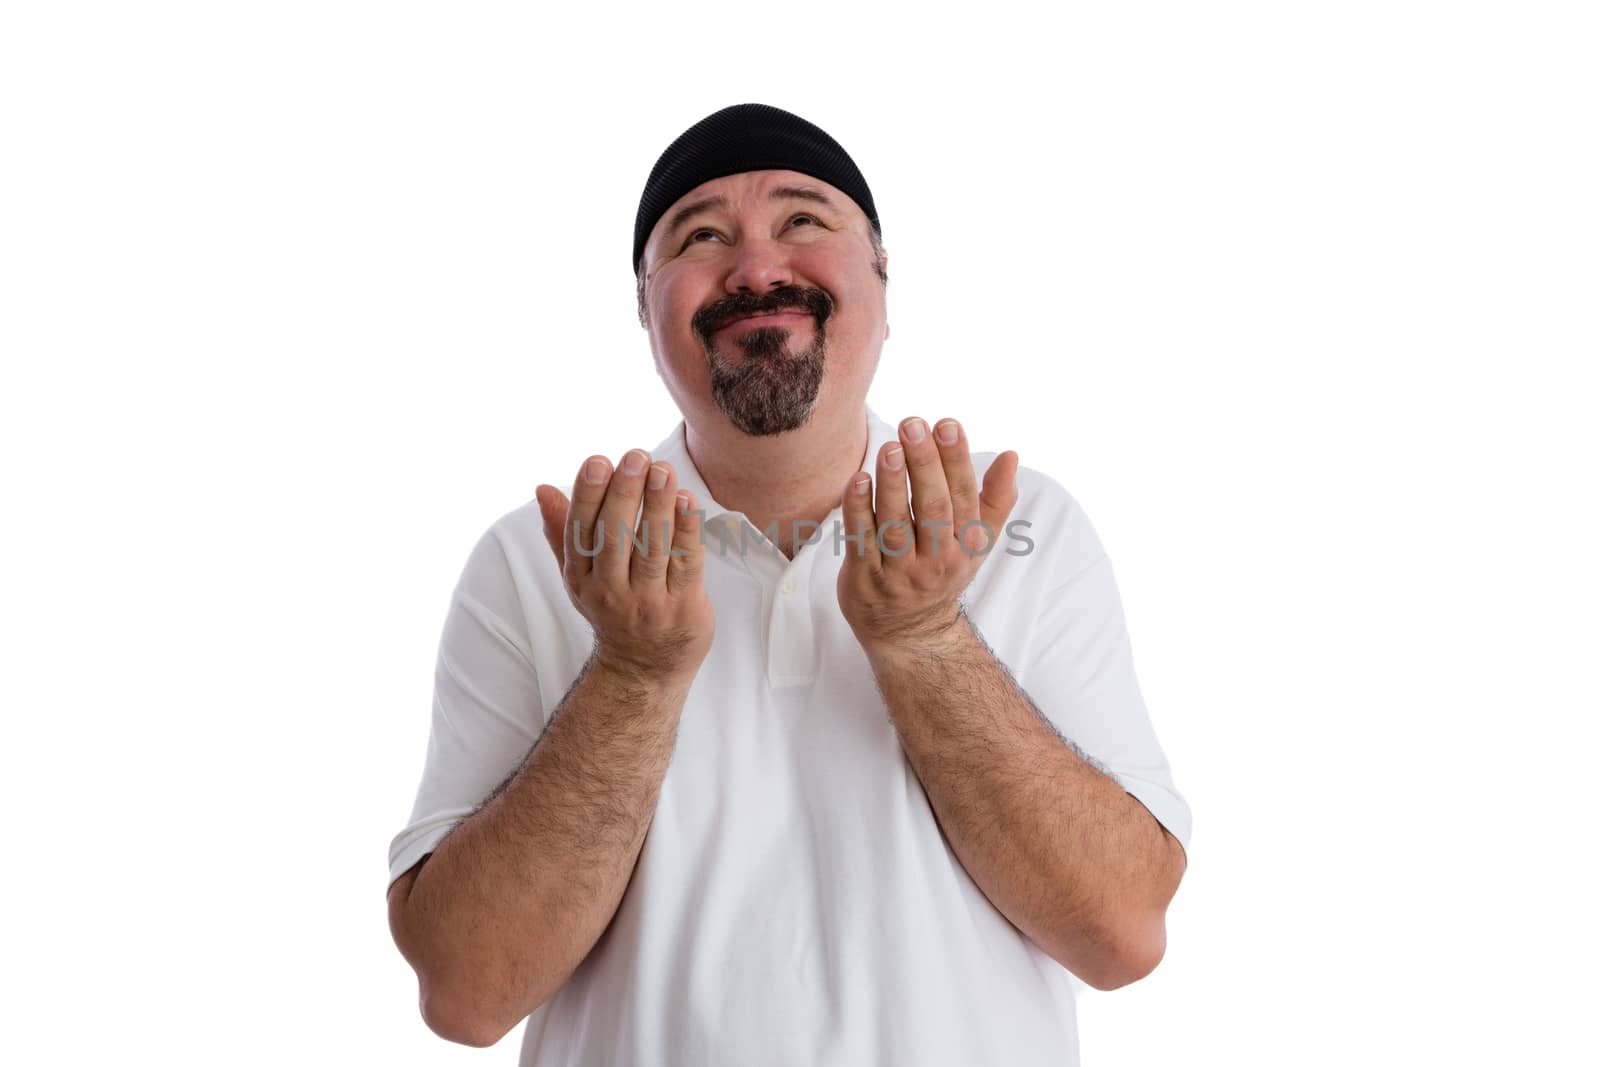 Middle-aged casual man with a goatee imploring God to find a solution raising his hands in supplication and looking up to heaven with a beseeching expression, isolated on white